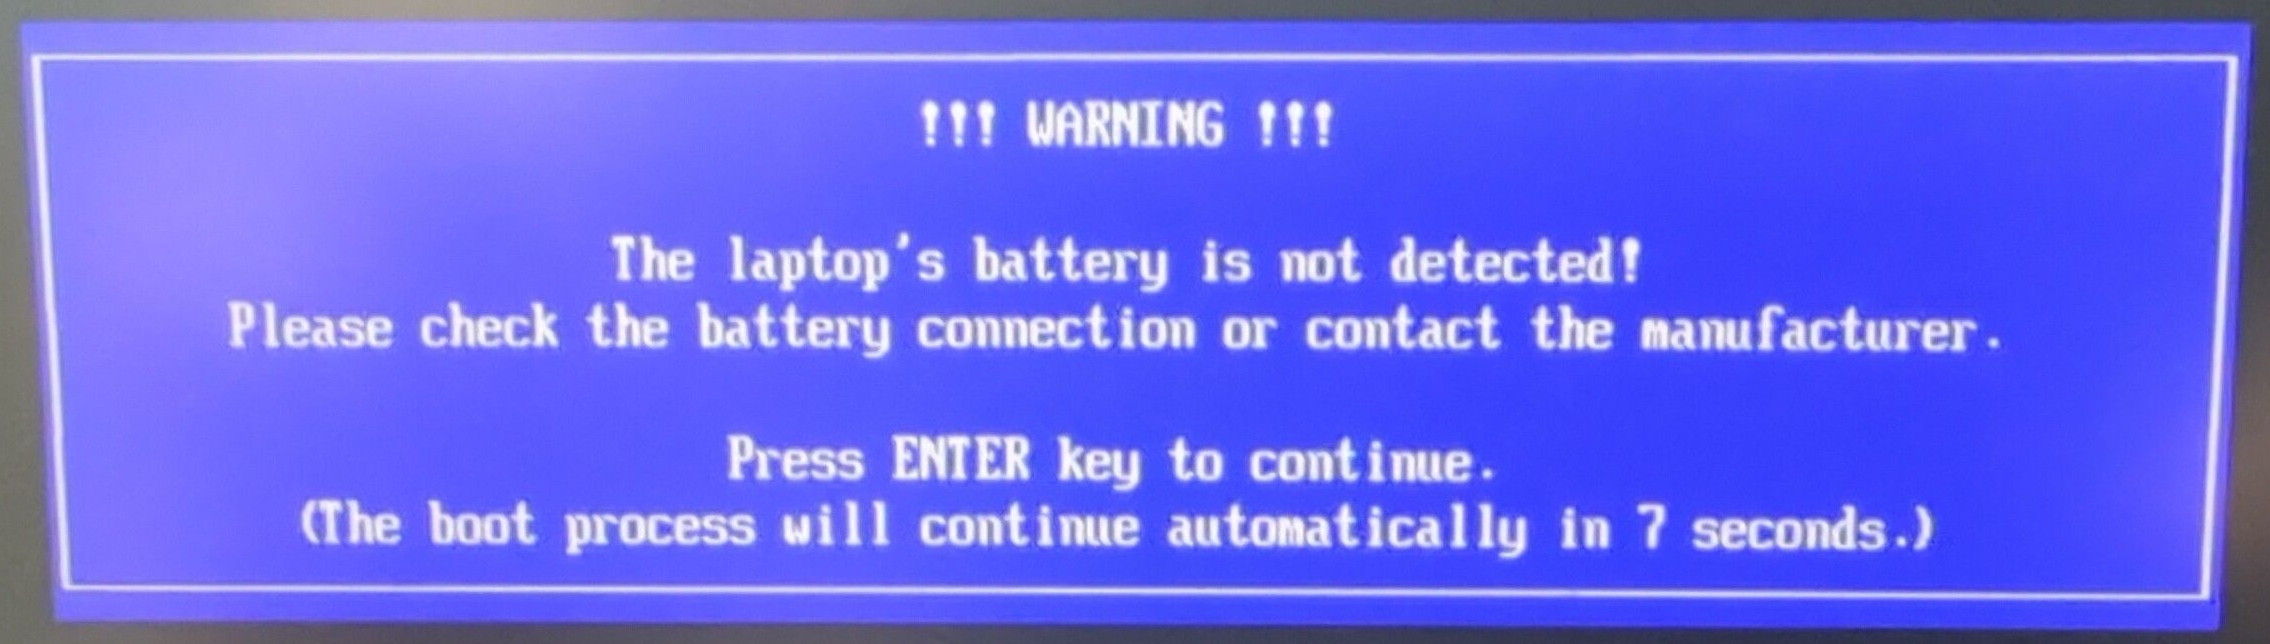 battery_connection_warning